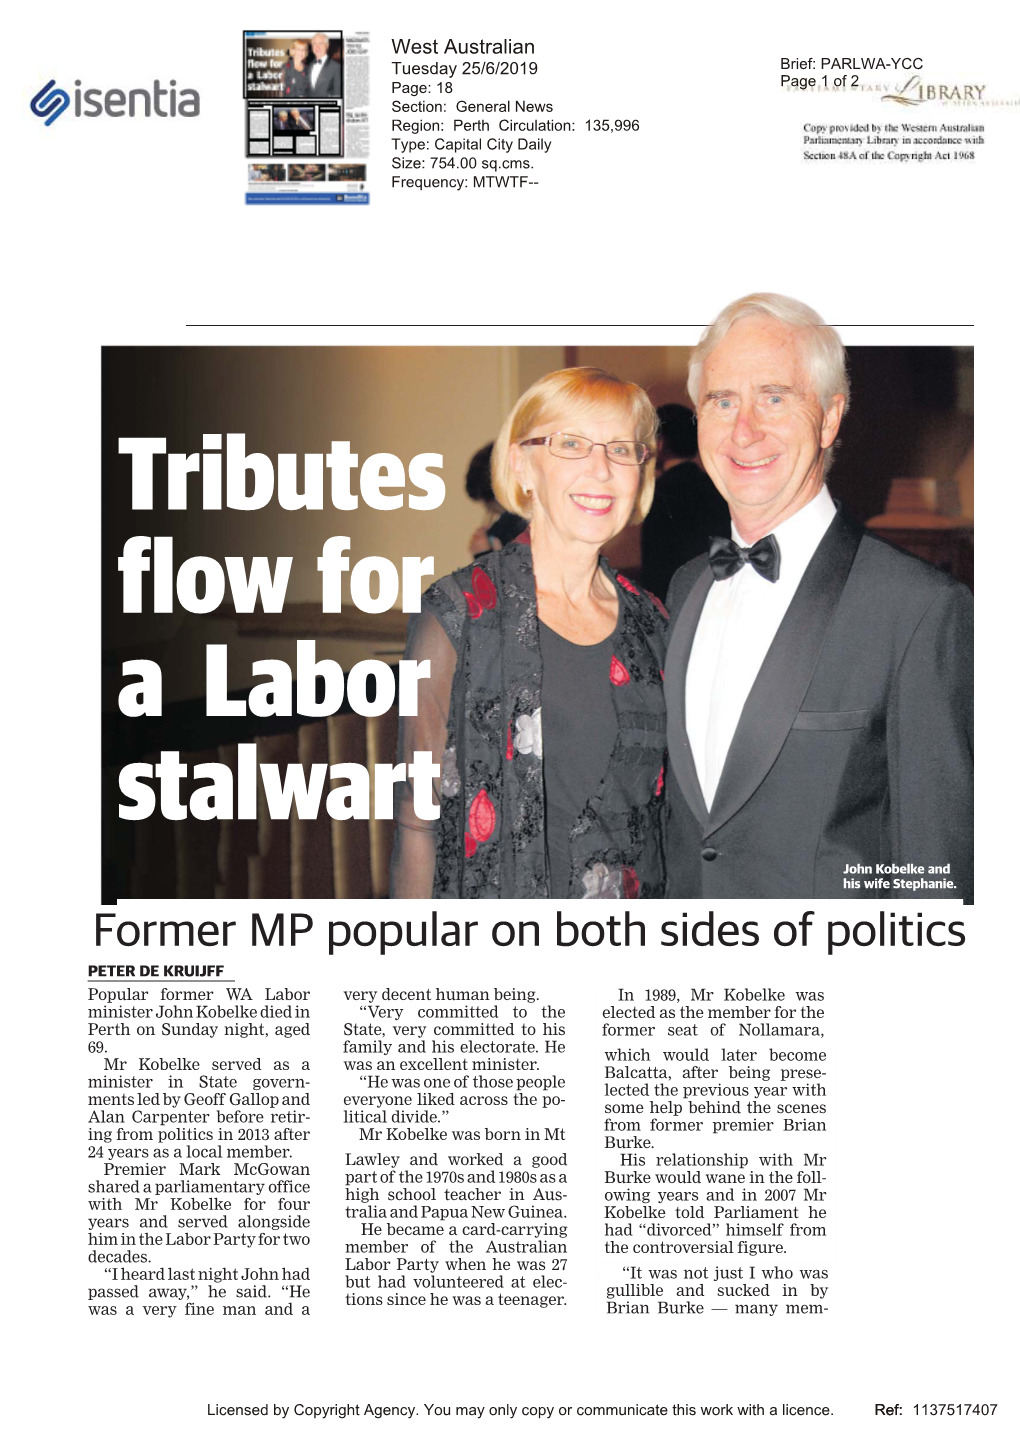 Tributes Flow for a Labor Stalwart